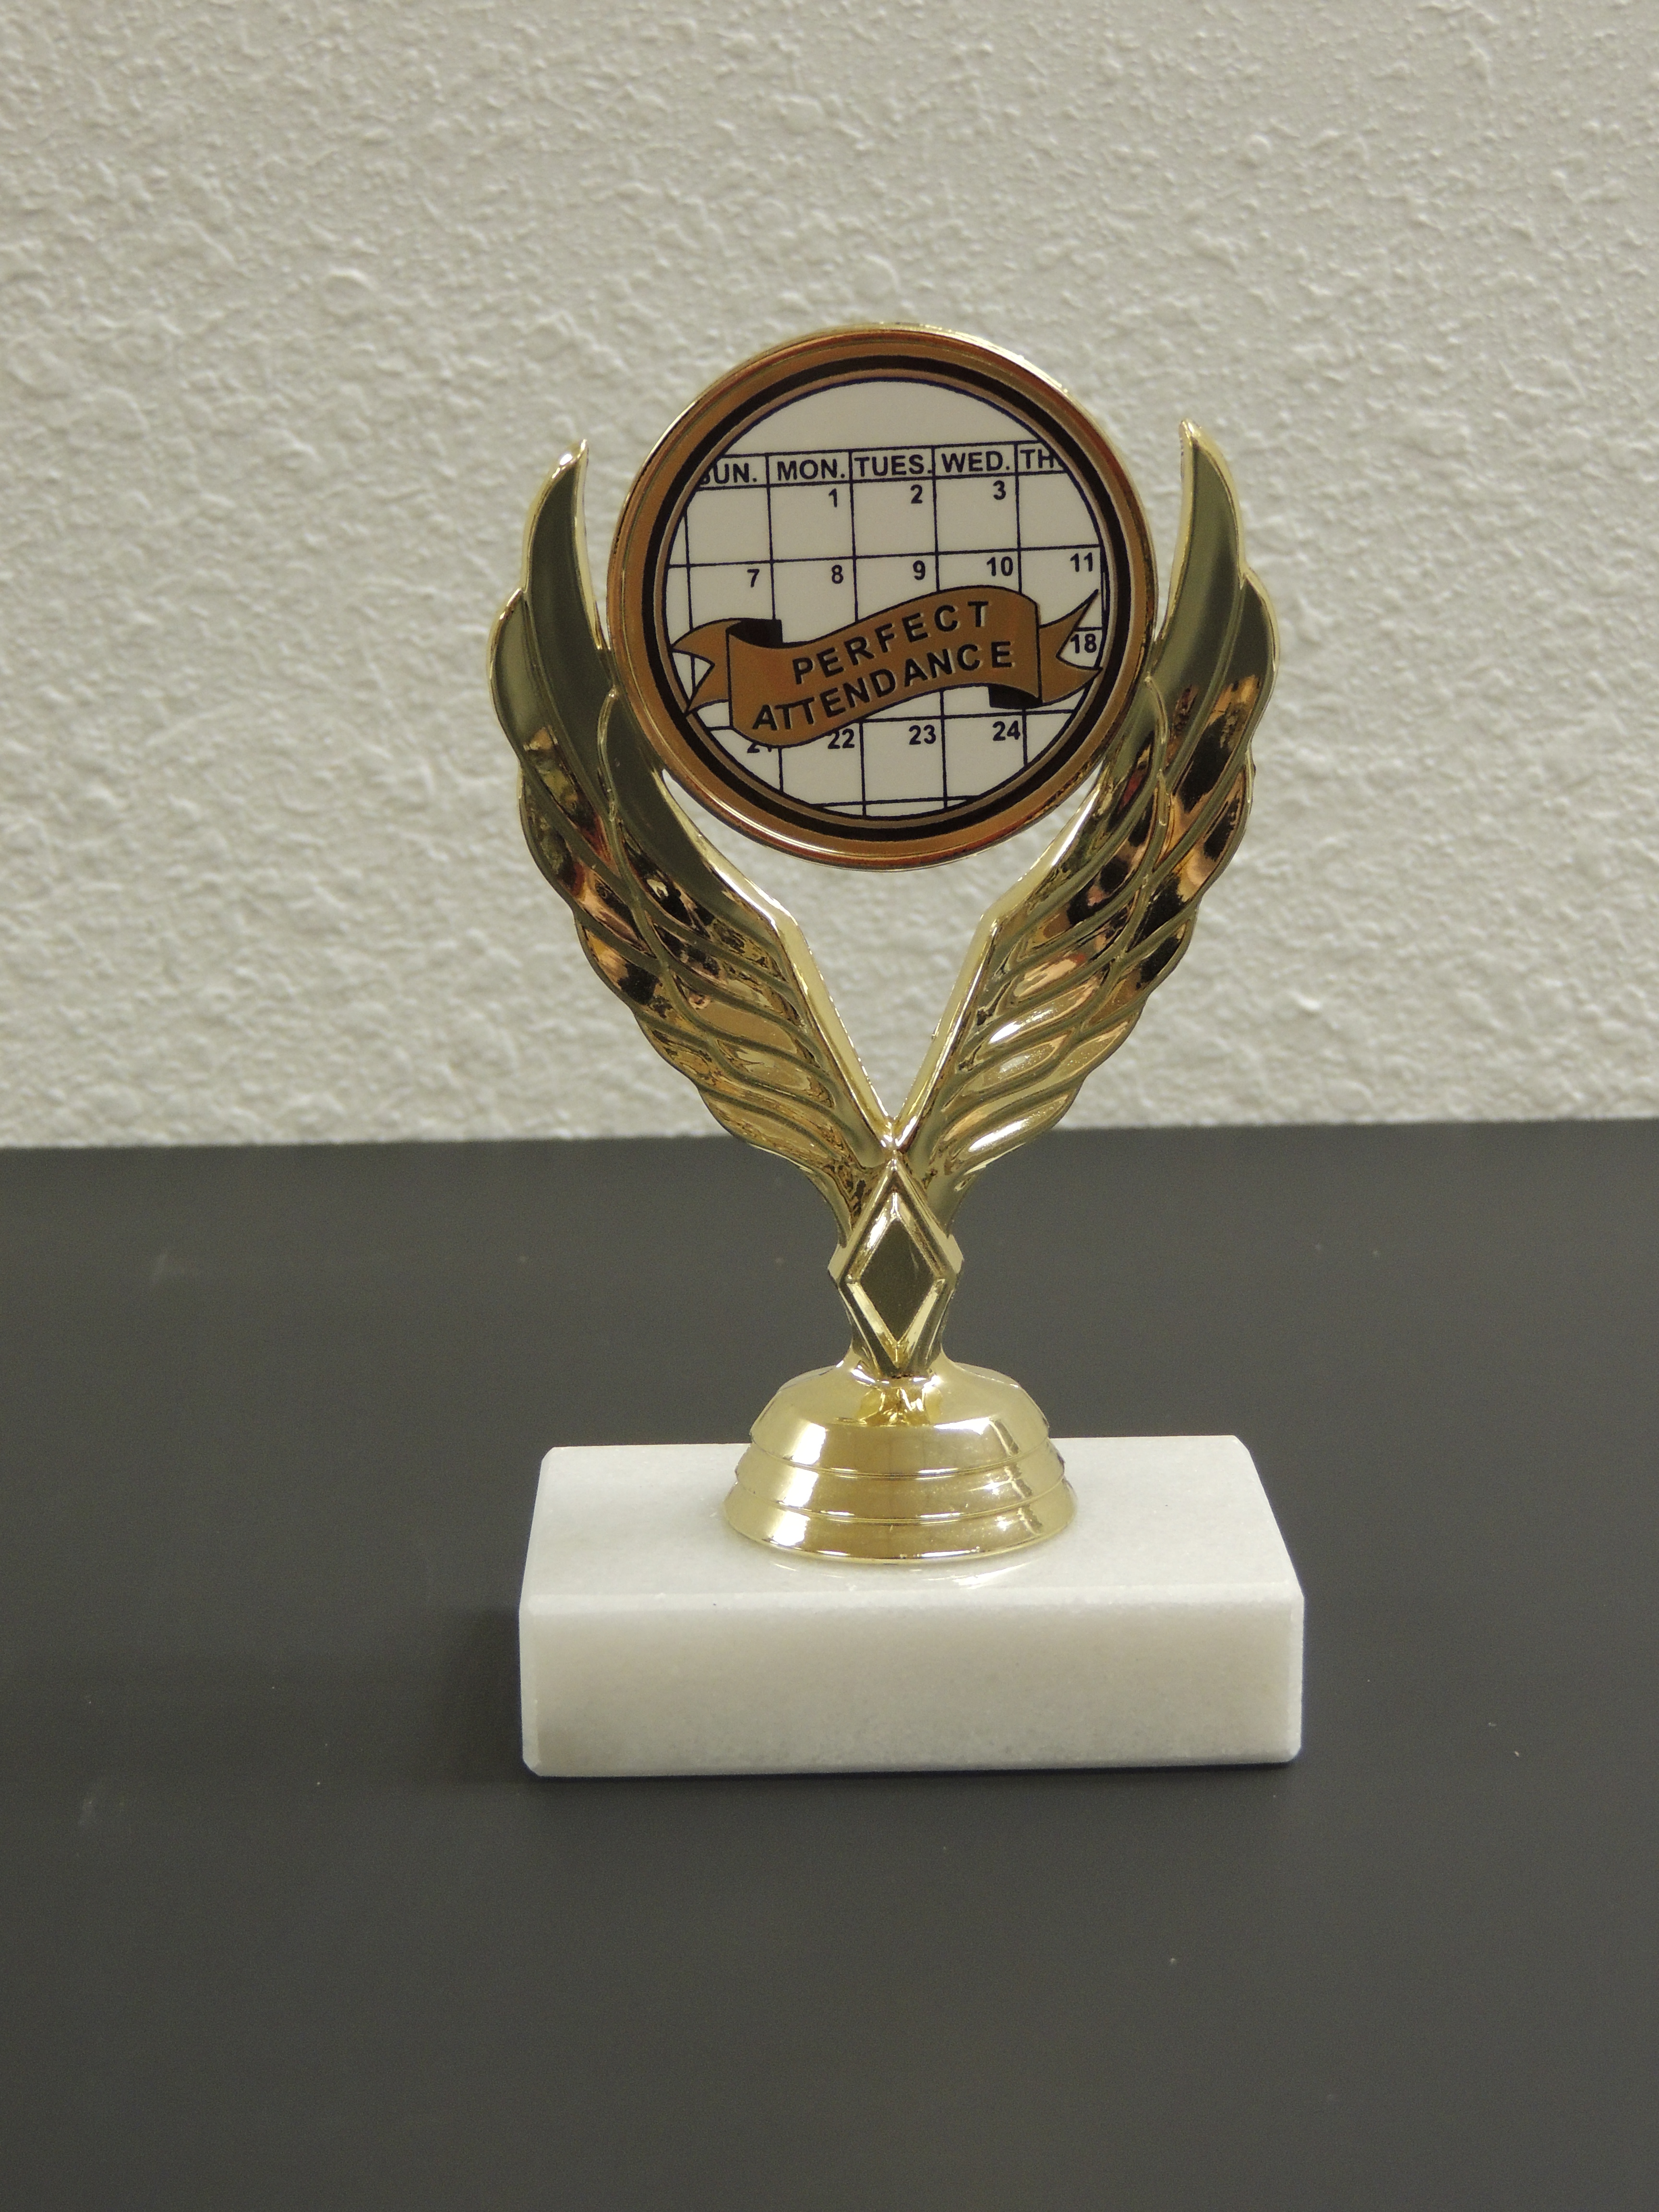 Perfect Attendance Trophy